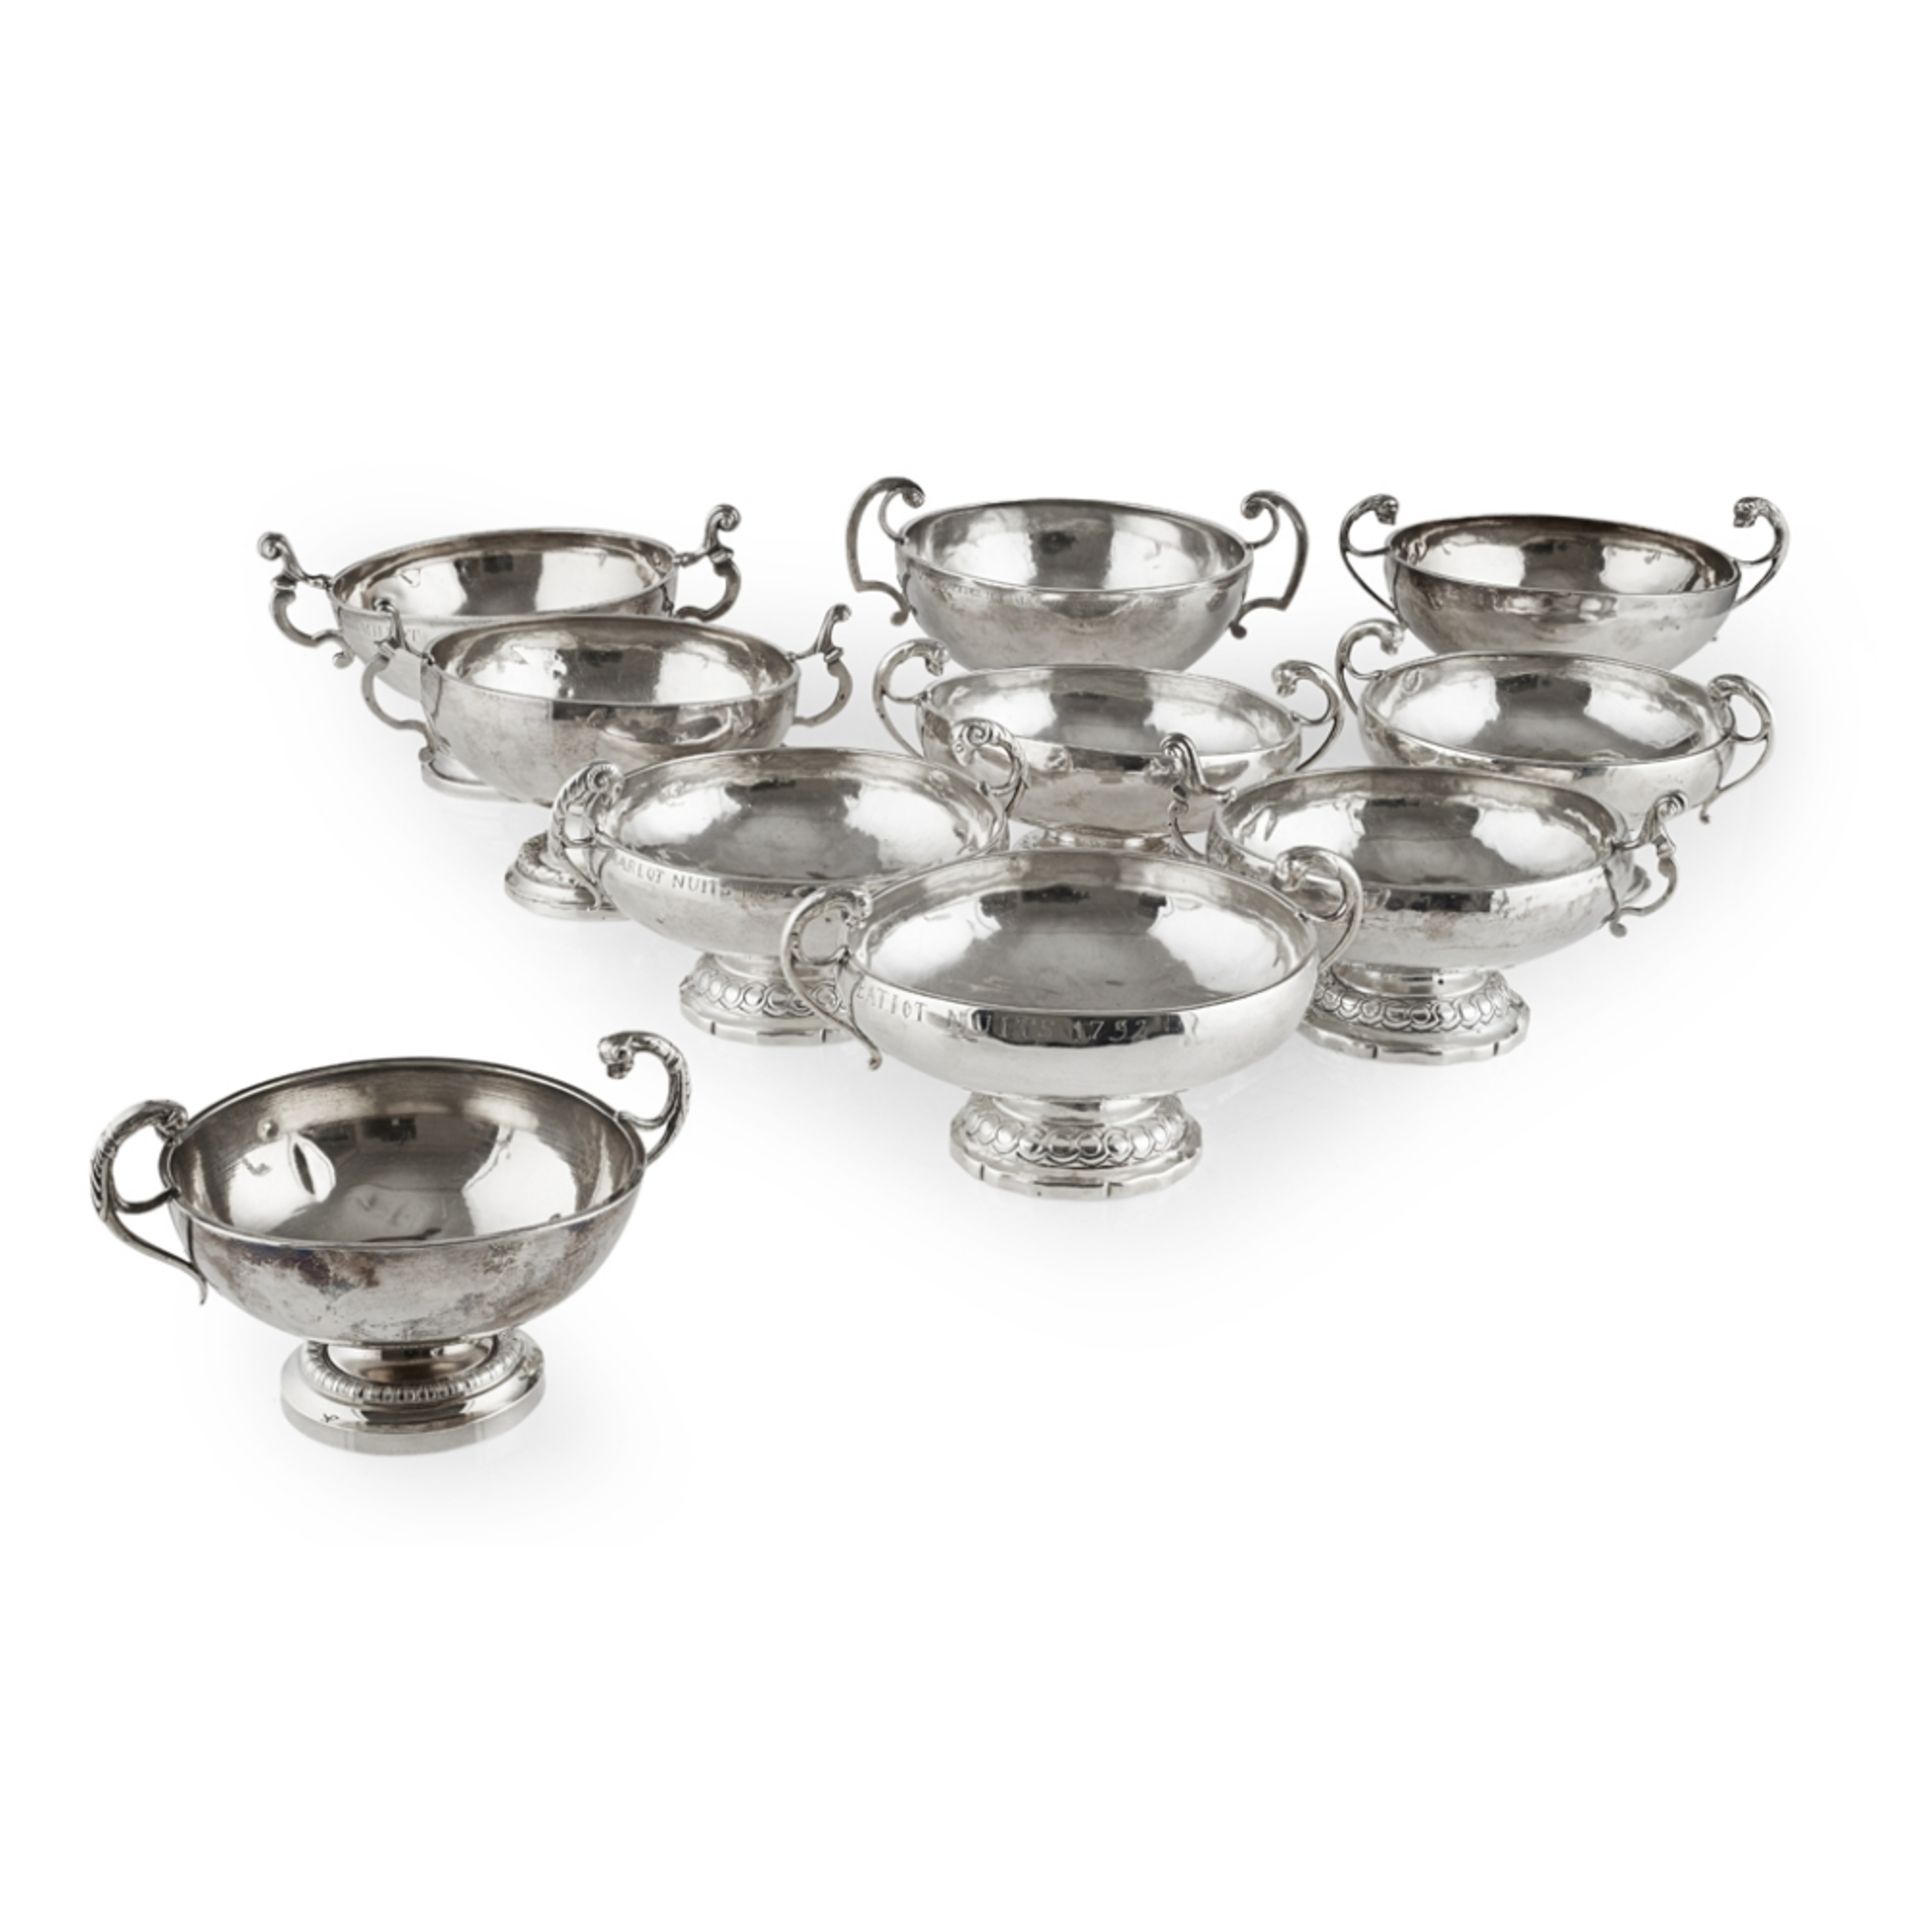 MATCHED SET OF TEN FRENCH SILVER TWIN-HANDLED SHALLOW CUPS19TH CENTURY various fineness marks for